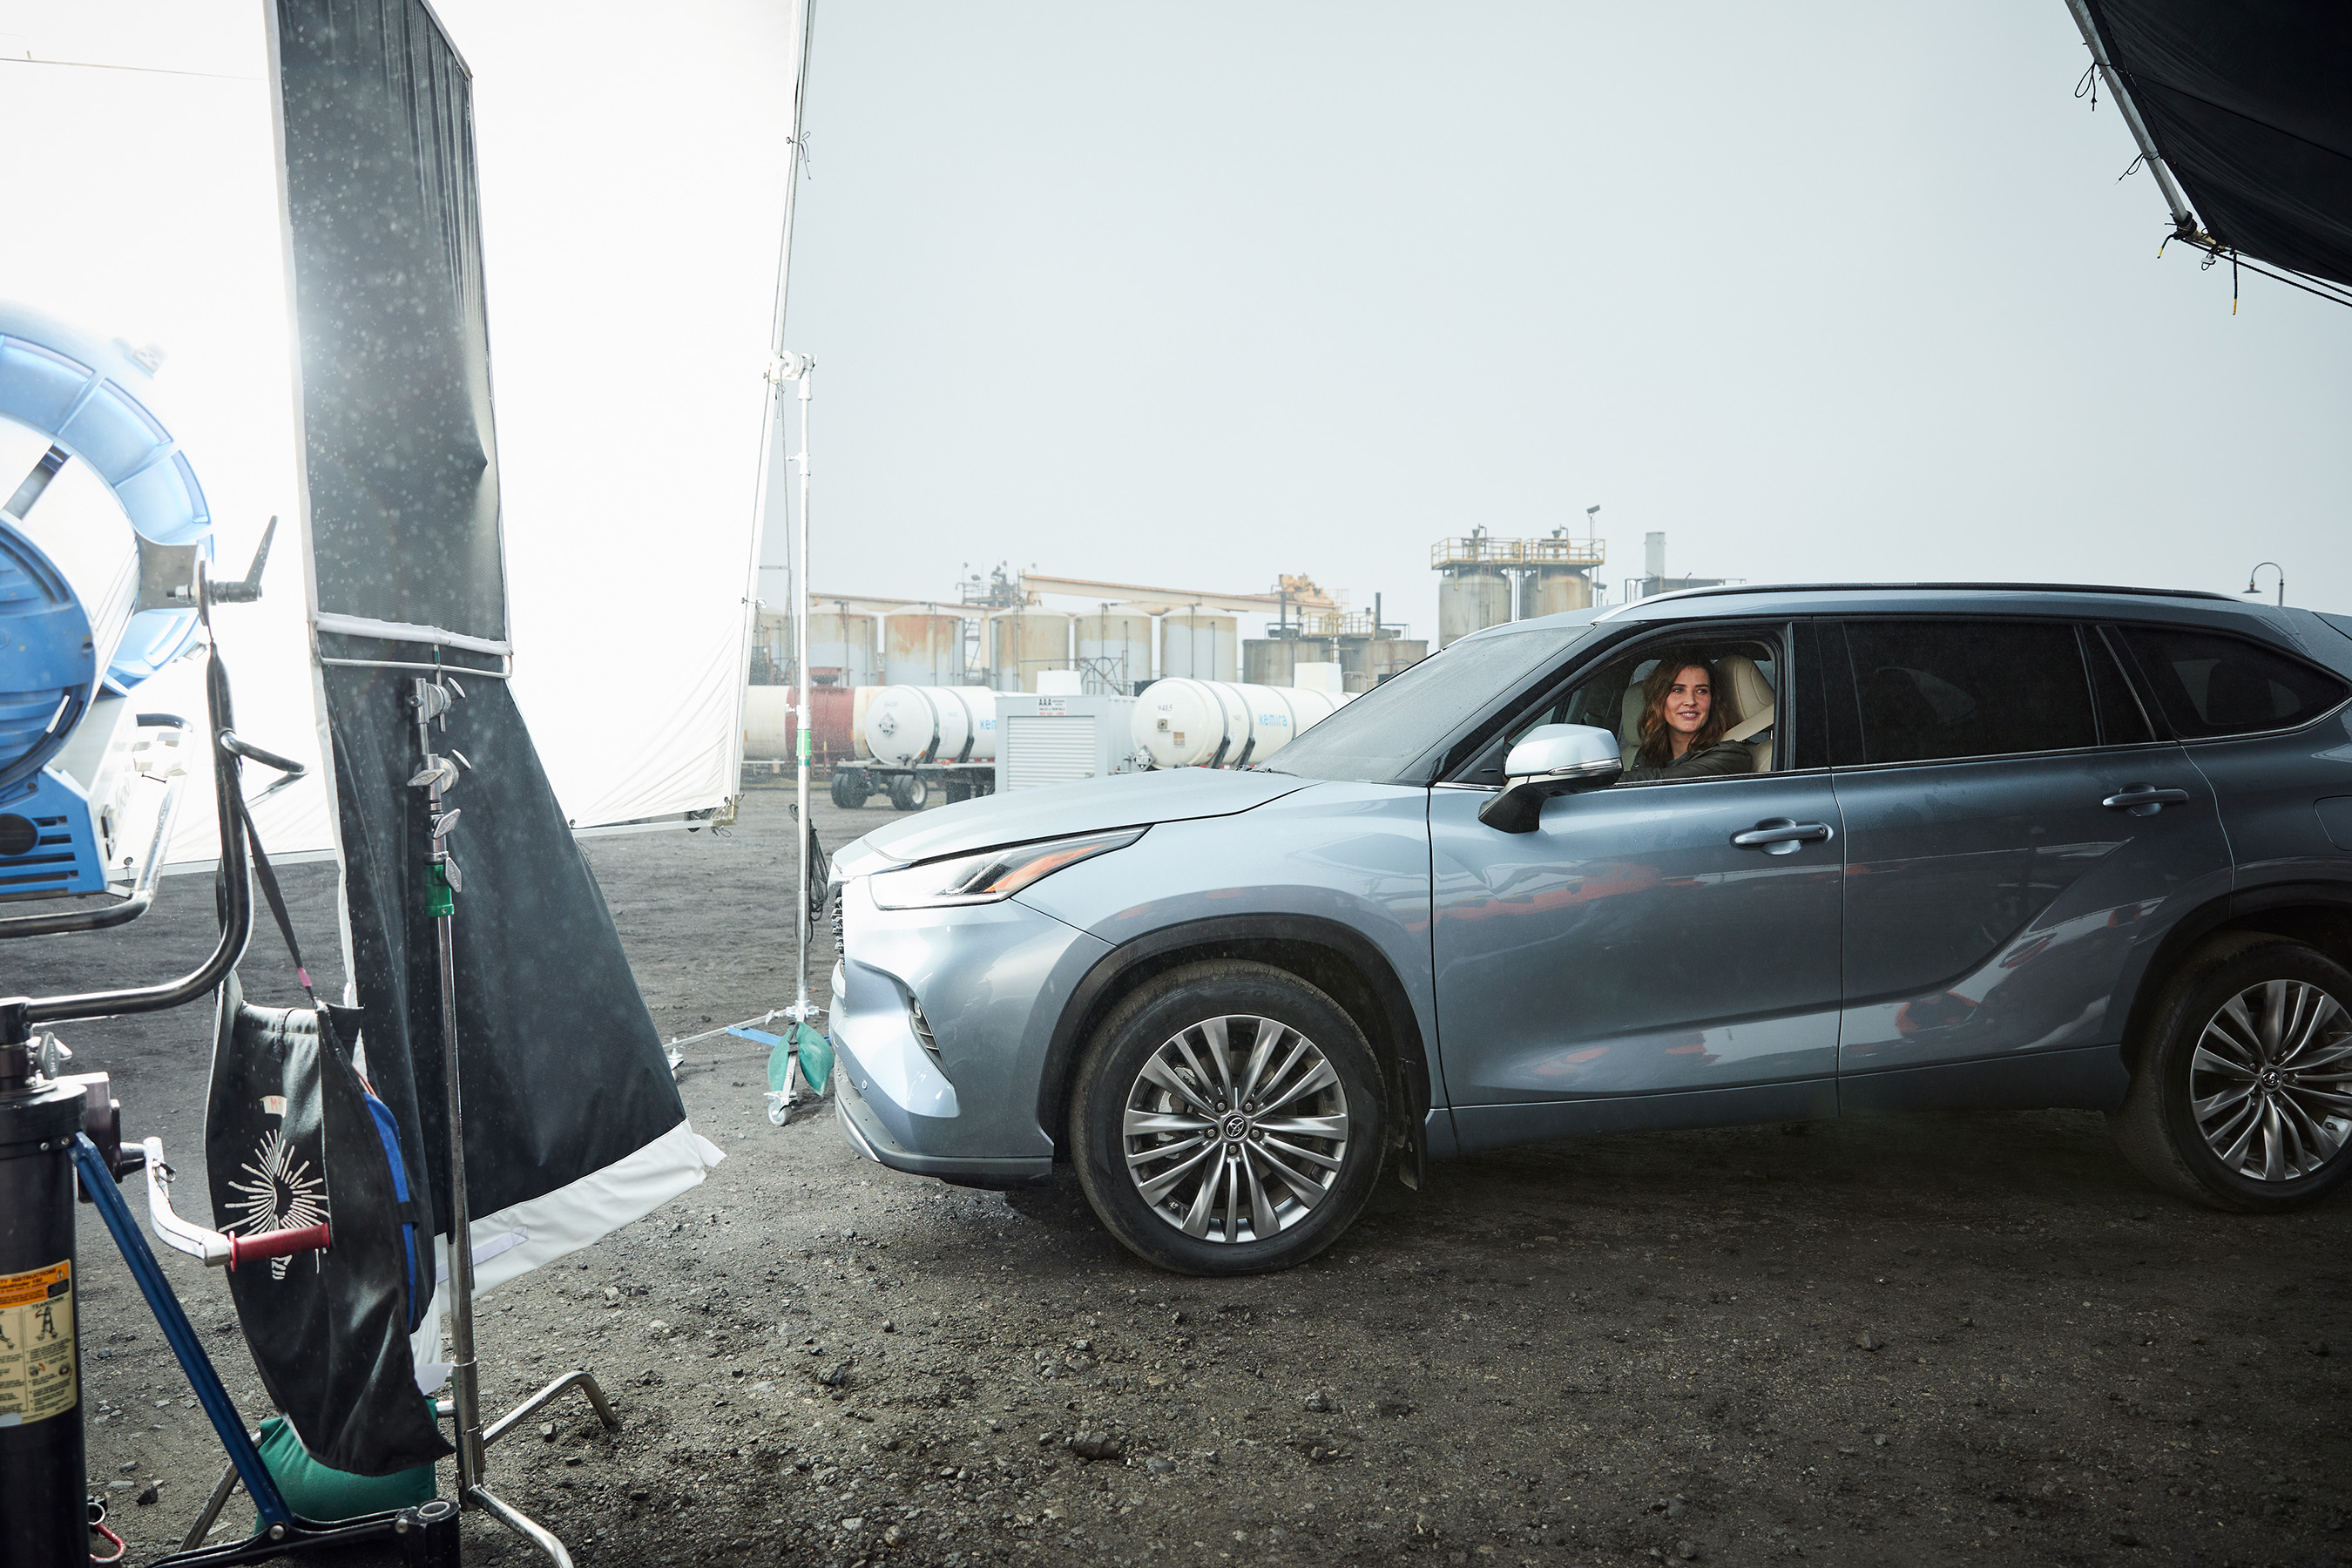 A behind-the-scenes look at Cobie Smulders shooting “Heroes” for Toyota’s 2020 Highlander Big Game ad.